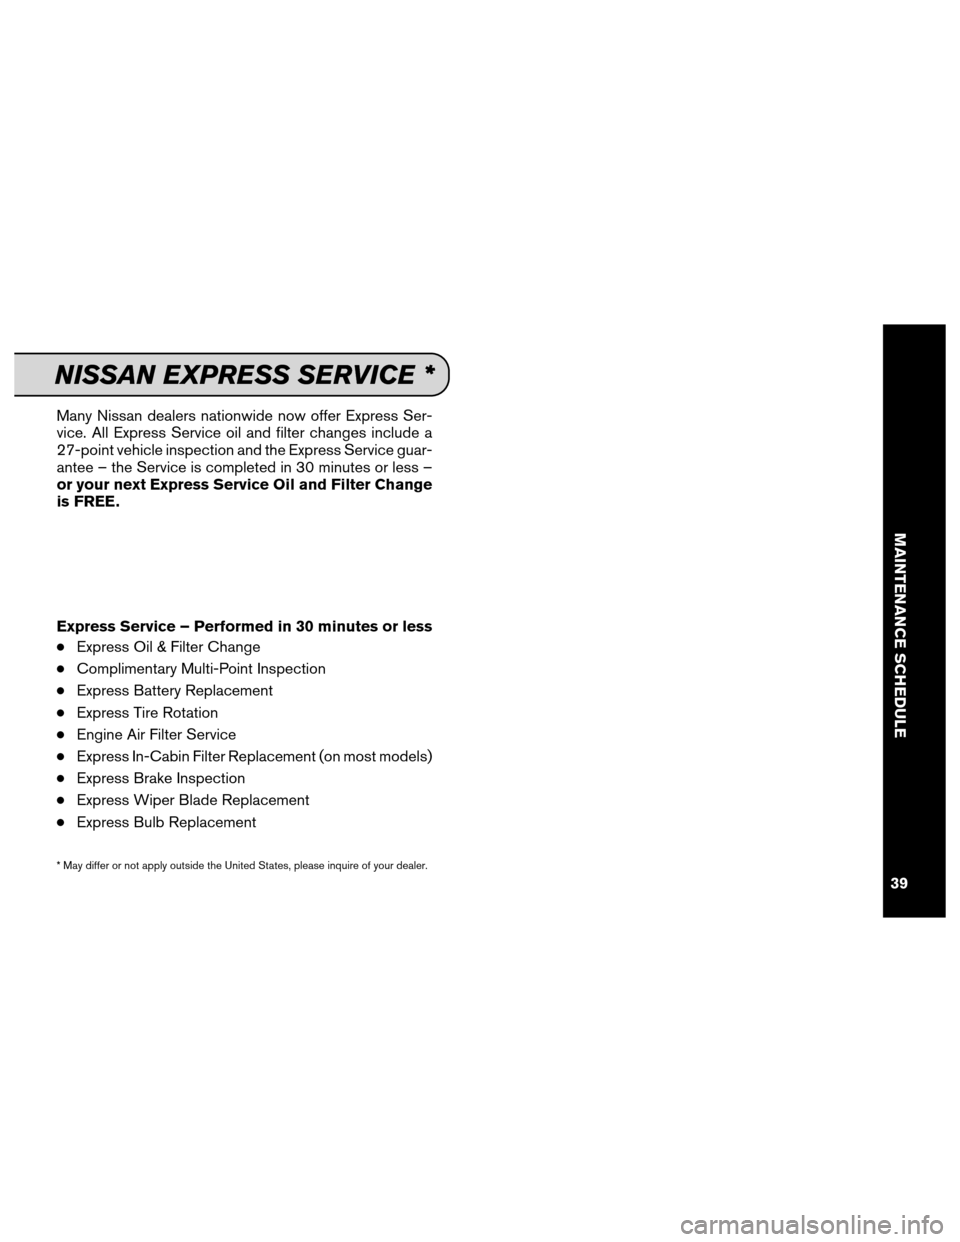 NISSAN QUEST 2013 RE52 / 4.G Service And Maintenance Guide Many Nissan dealers nationwide now offer Express Ser-
vice. All Express Service oil and filter changes include a
27-point vehicle inspection and the Express Service guar-
antee – the Service is comp